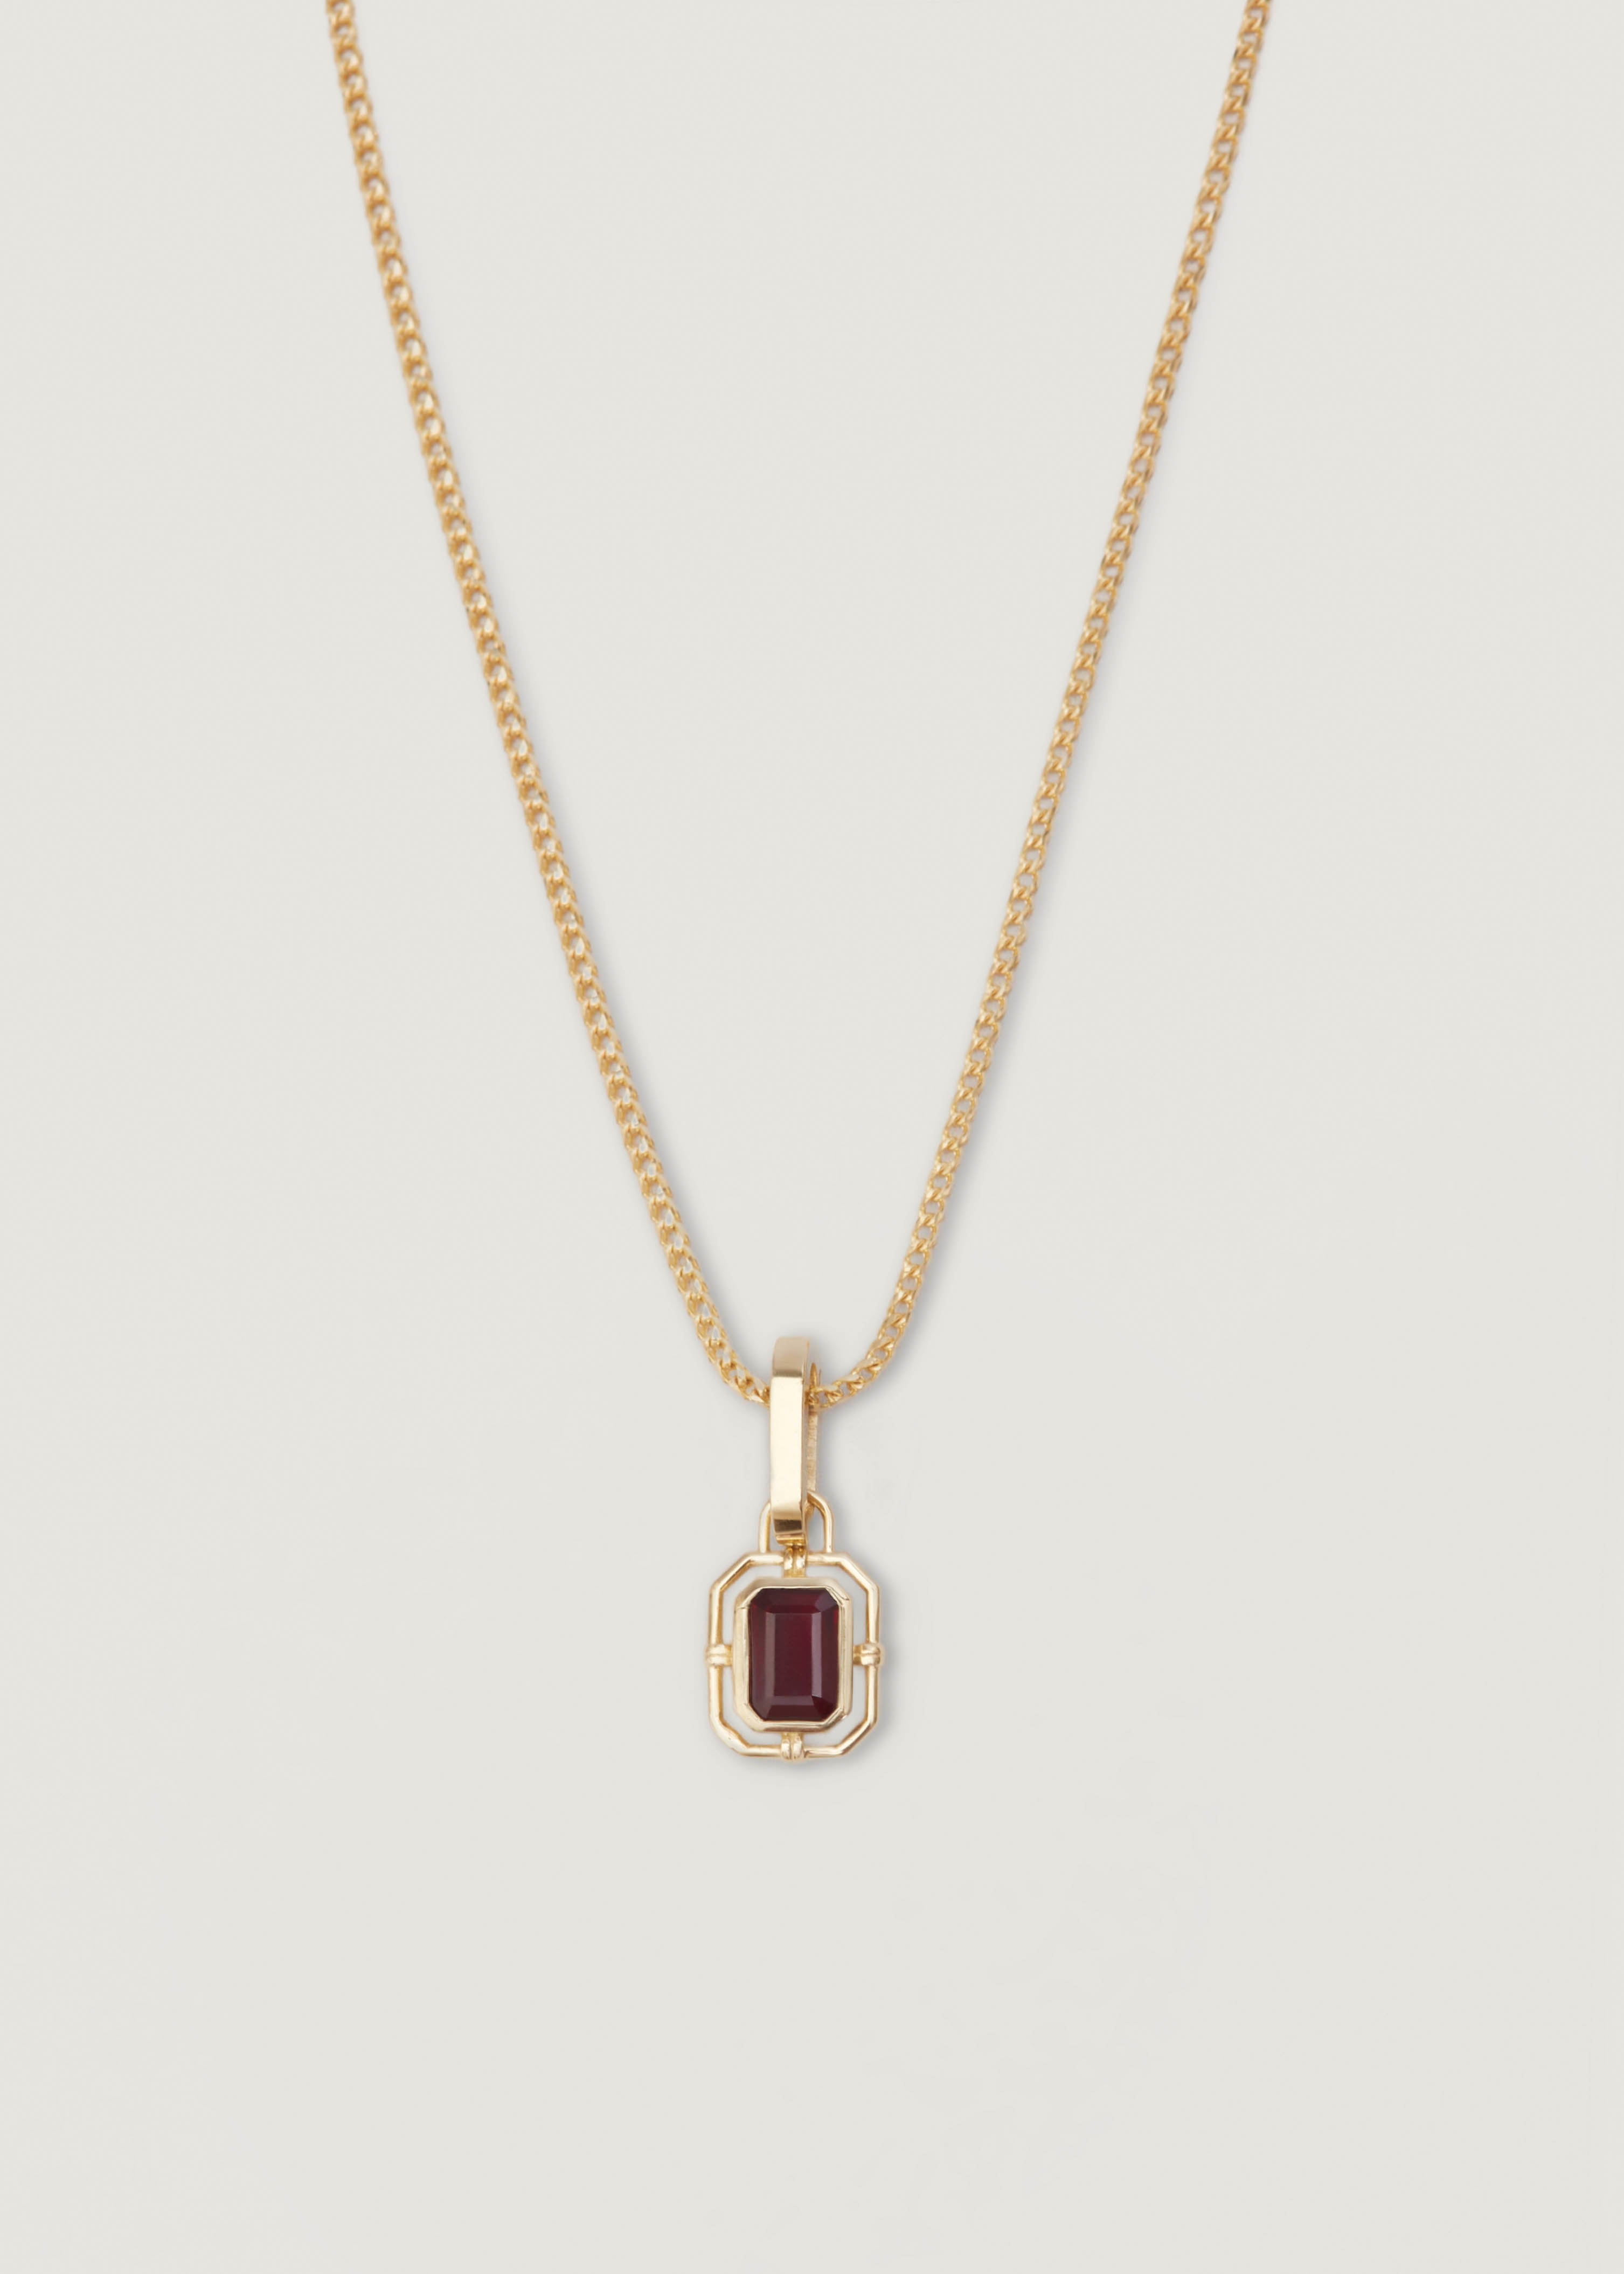 alt="Lyra Baguette Pendant I - Ruby with box chain"